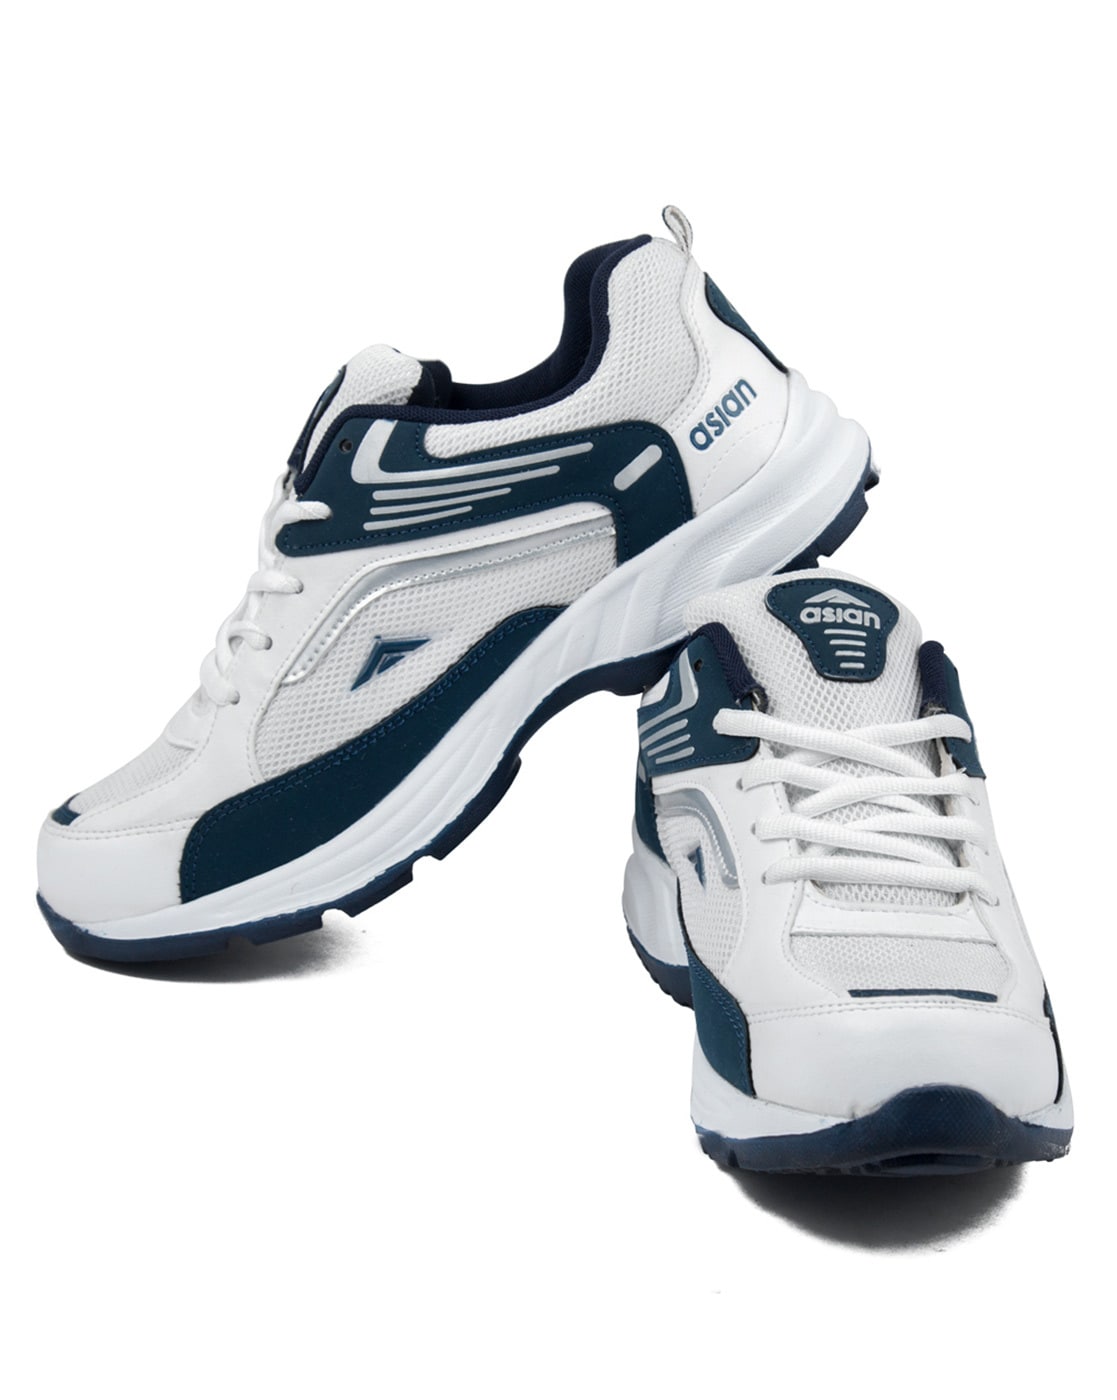 Buy Running Shoes For Men: Hurricane-Wht-Problue | Campus Shoes